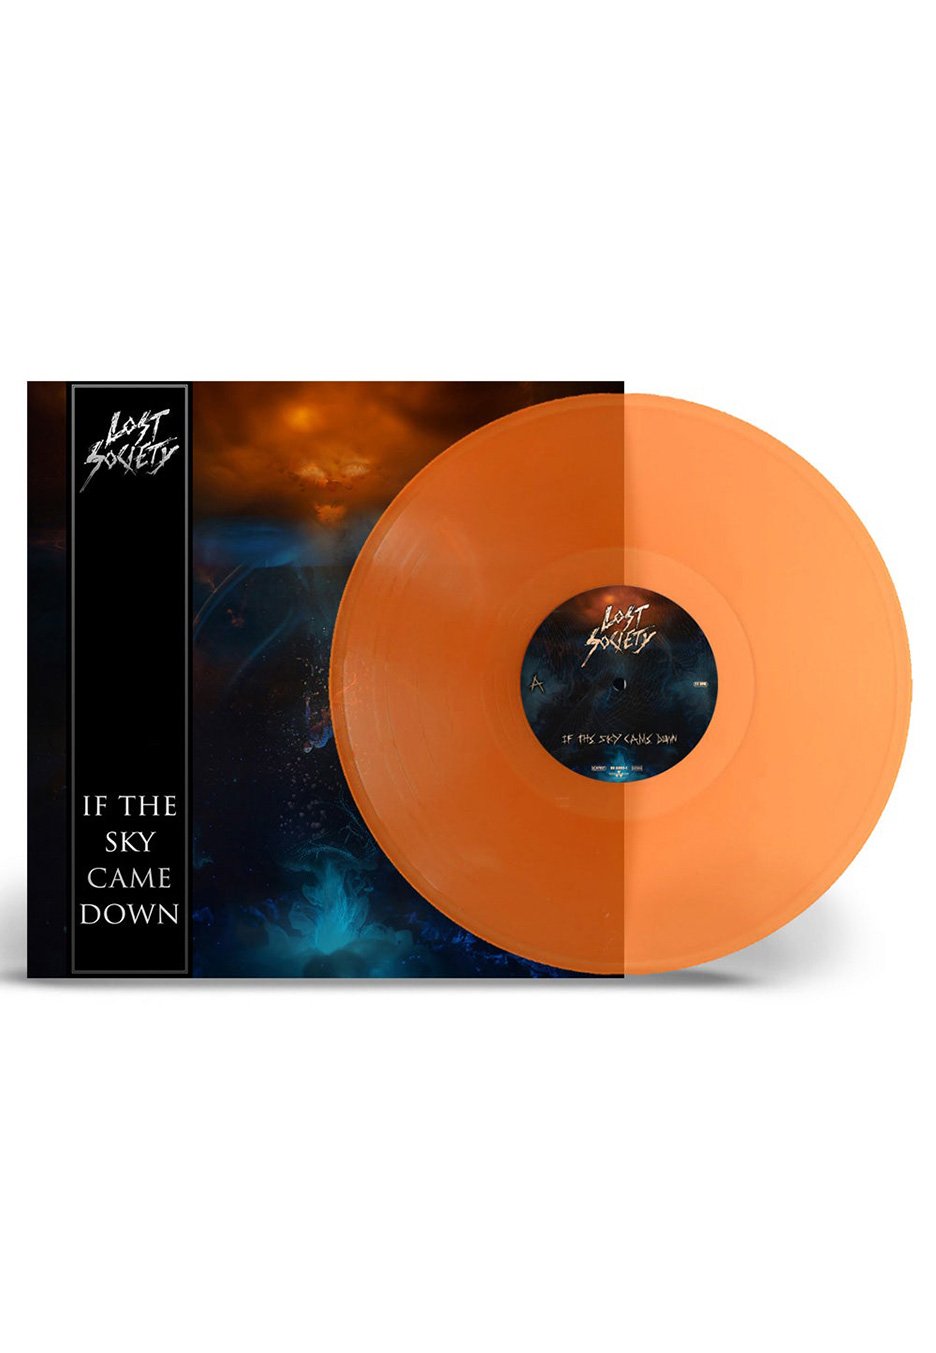 Lost Society - If The Sky Came Down Transparent Orange - Colored Vinyl